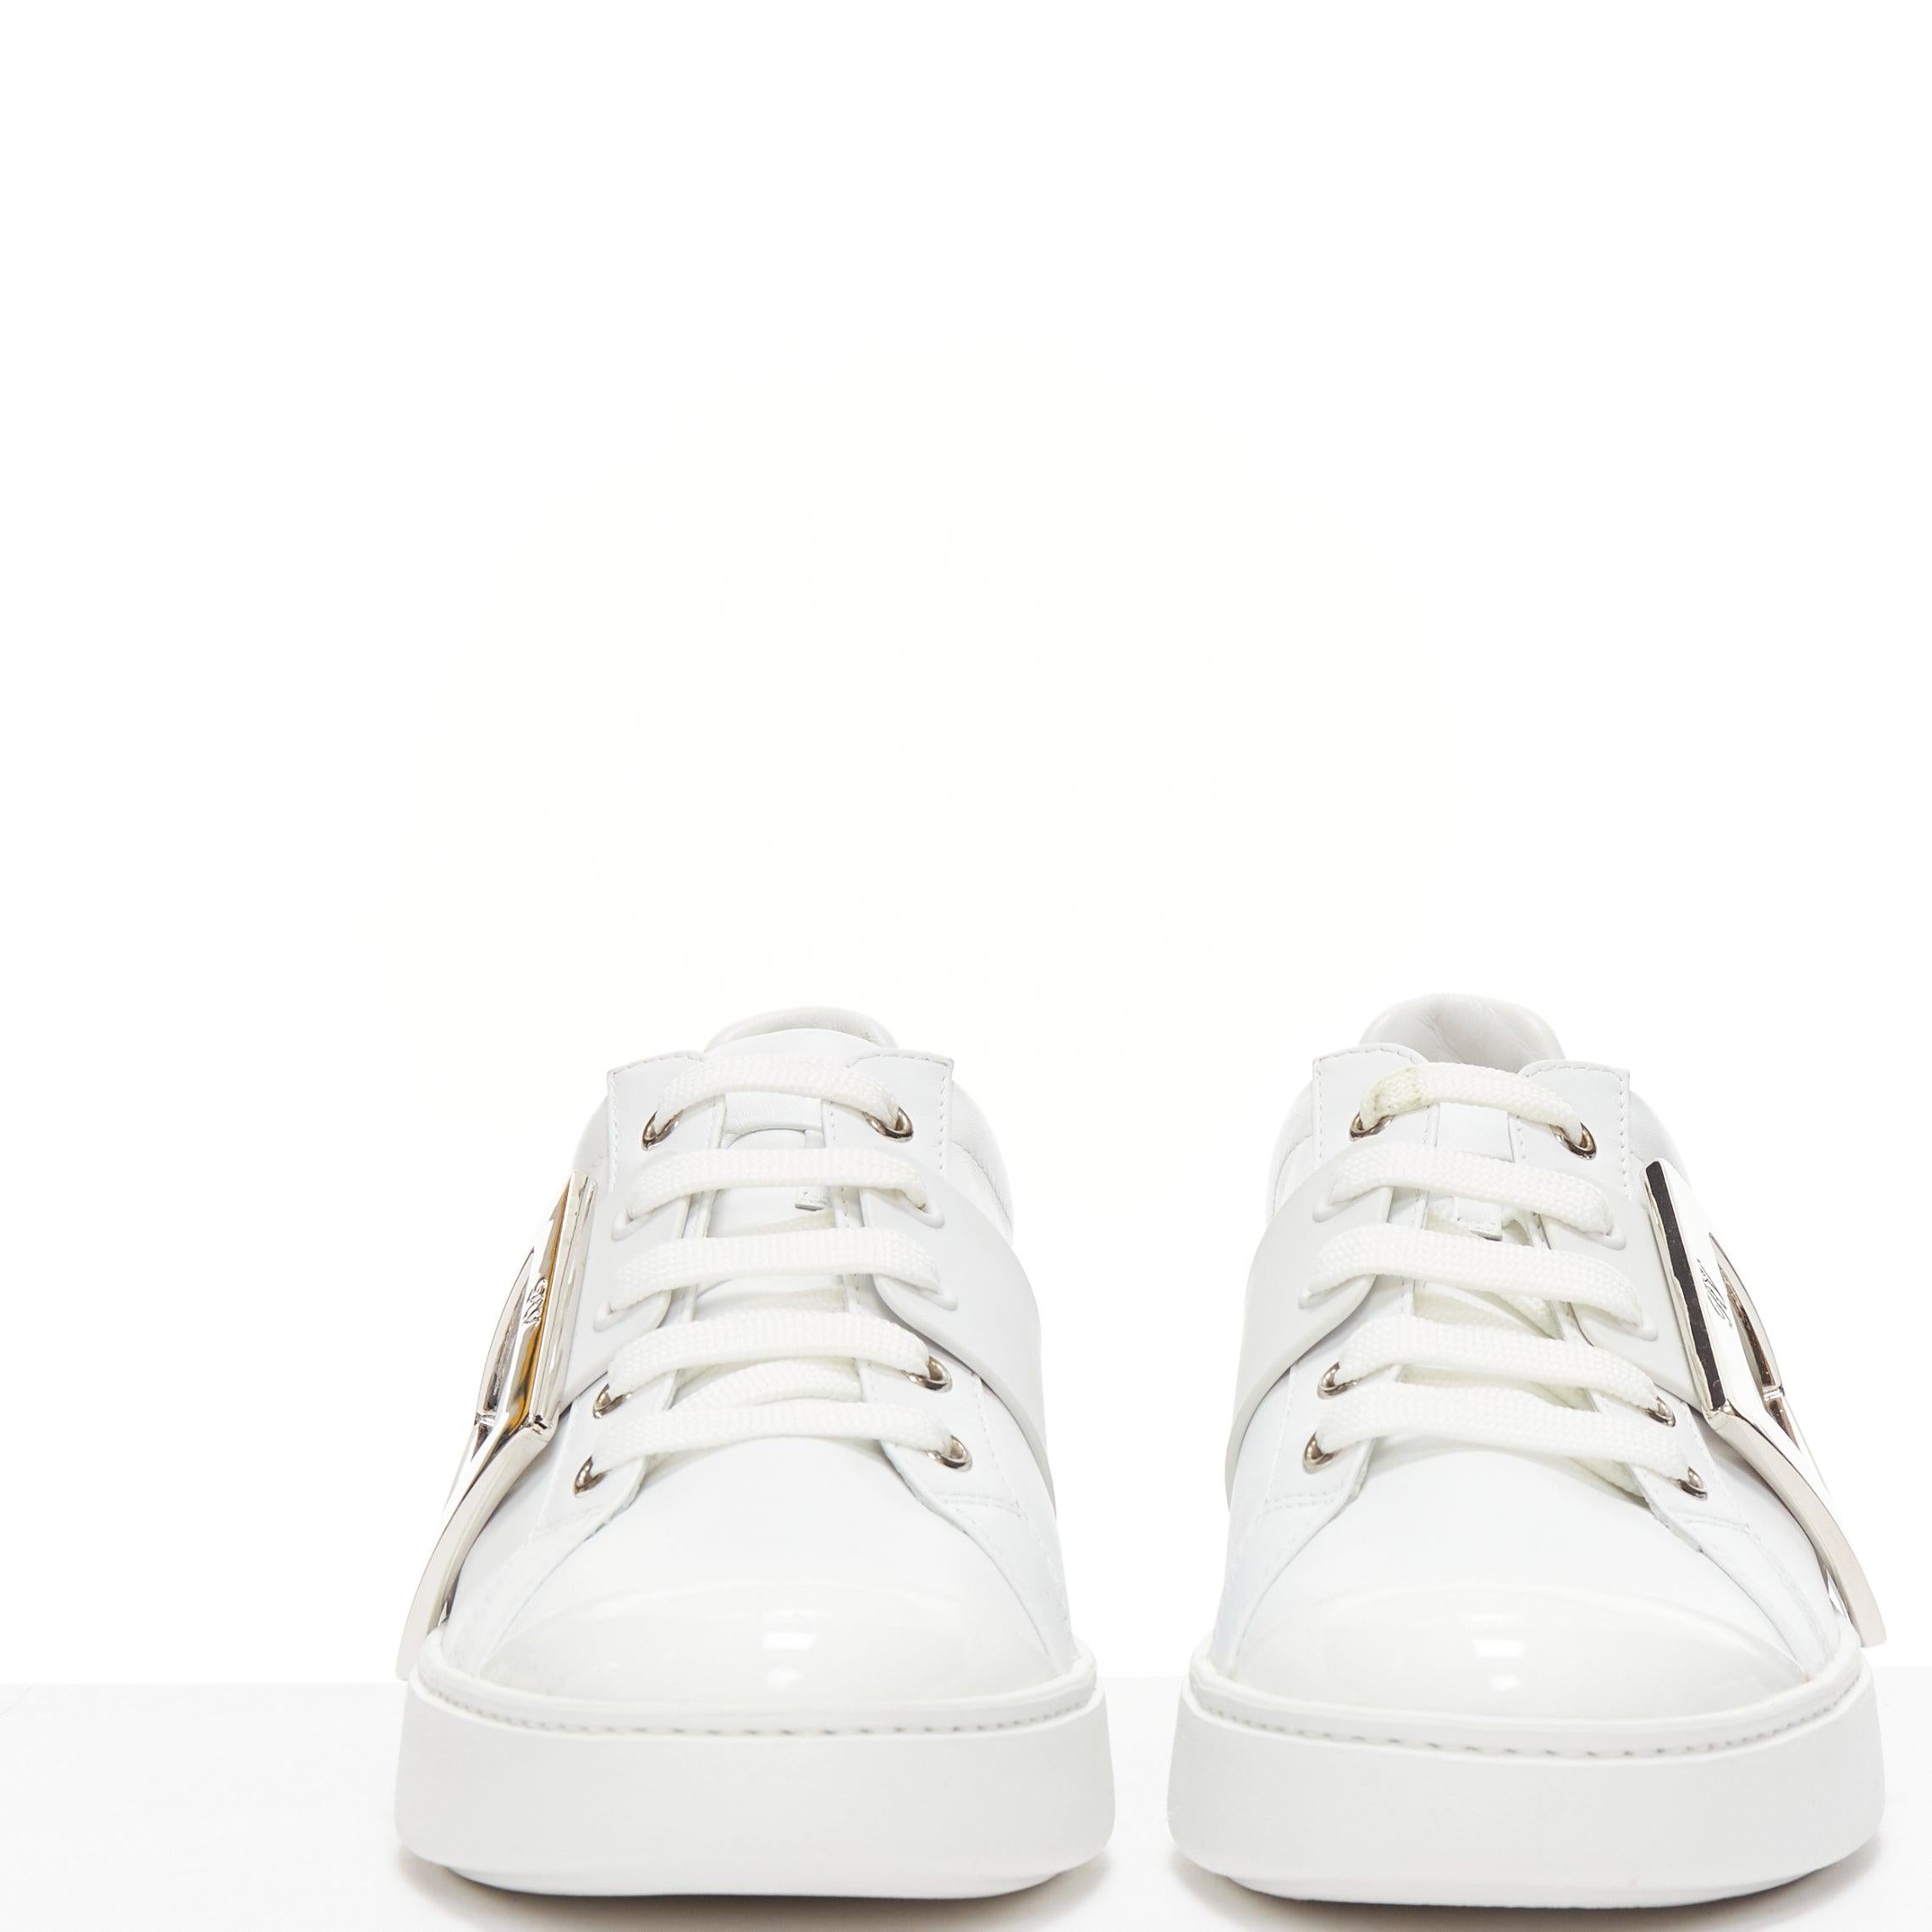 ROGER VIVIER Viv Skate white patent silver RV buckle sneakers EU38.5 In Good Condition For Sale In Hong Kong, NT